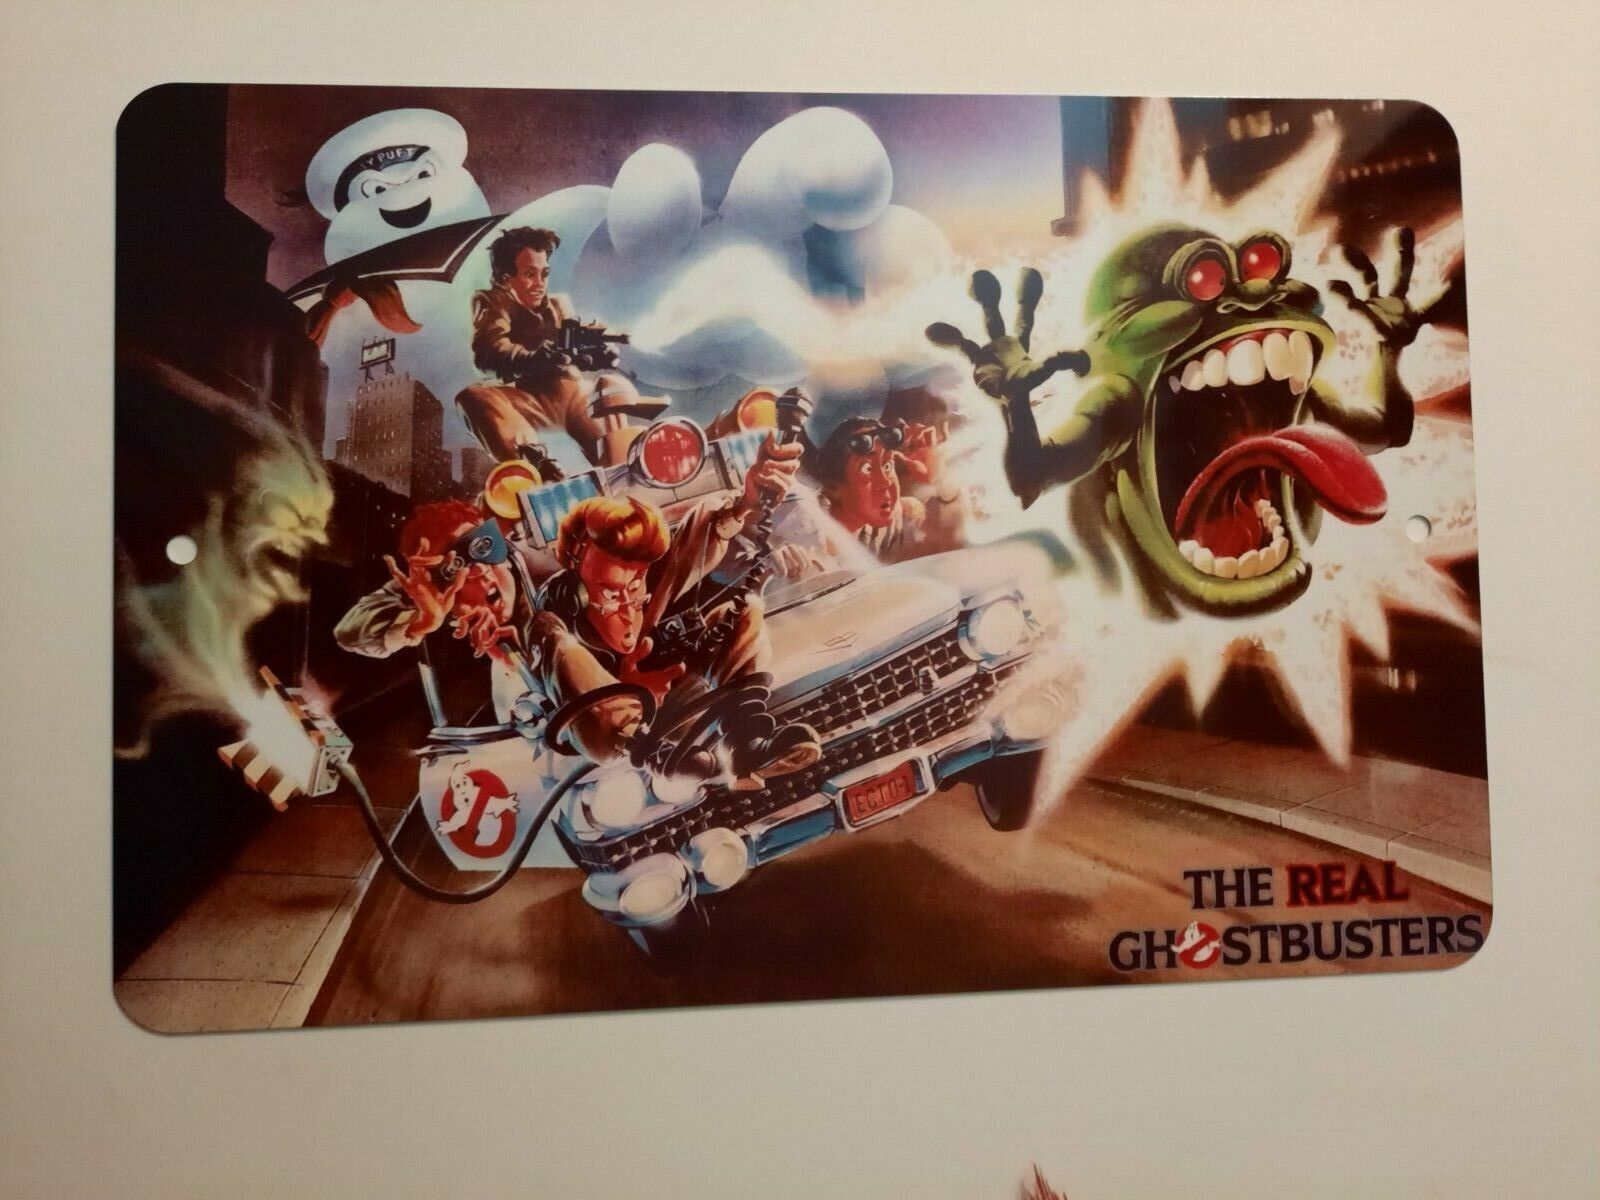 The Real Ghostbusters Cartoon Artwork 8x12 Metal Wall Sign